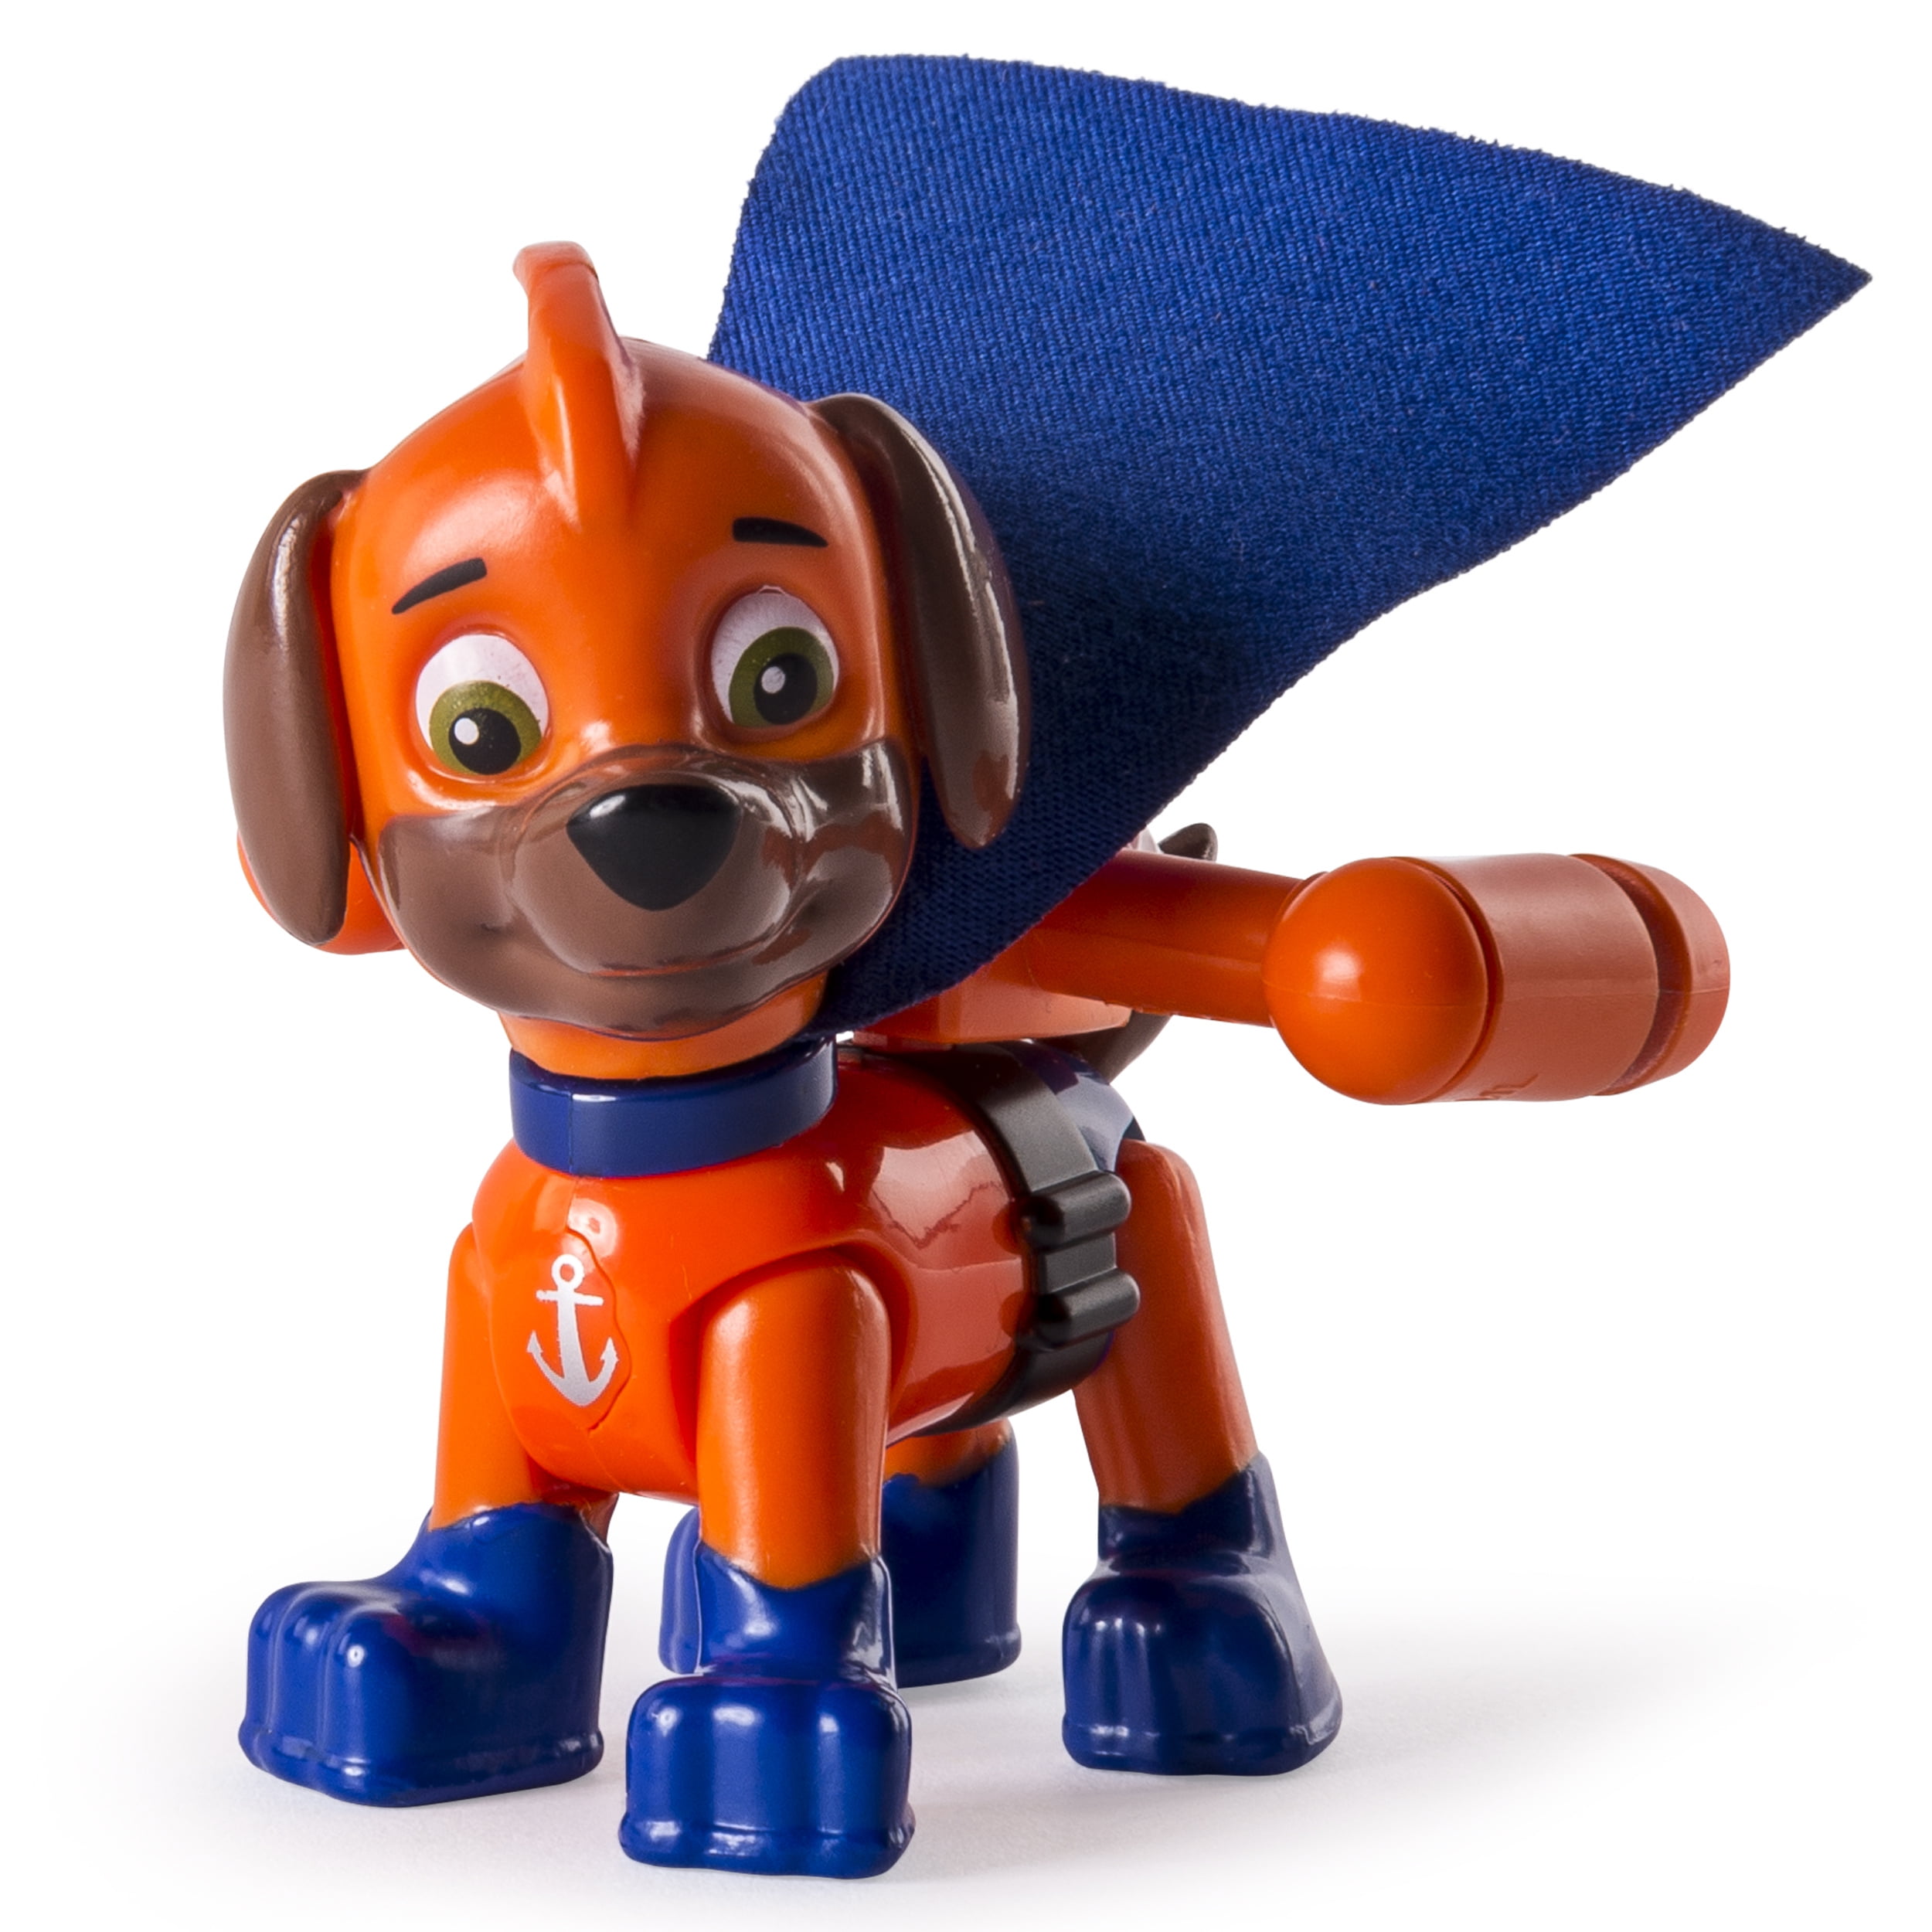 Paw Patrol Zuma Super Pups Action Figure with Cape and Removable Pack  Complete